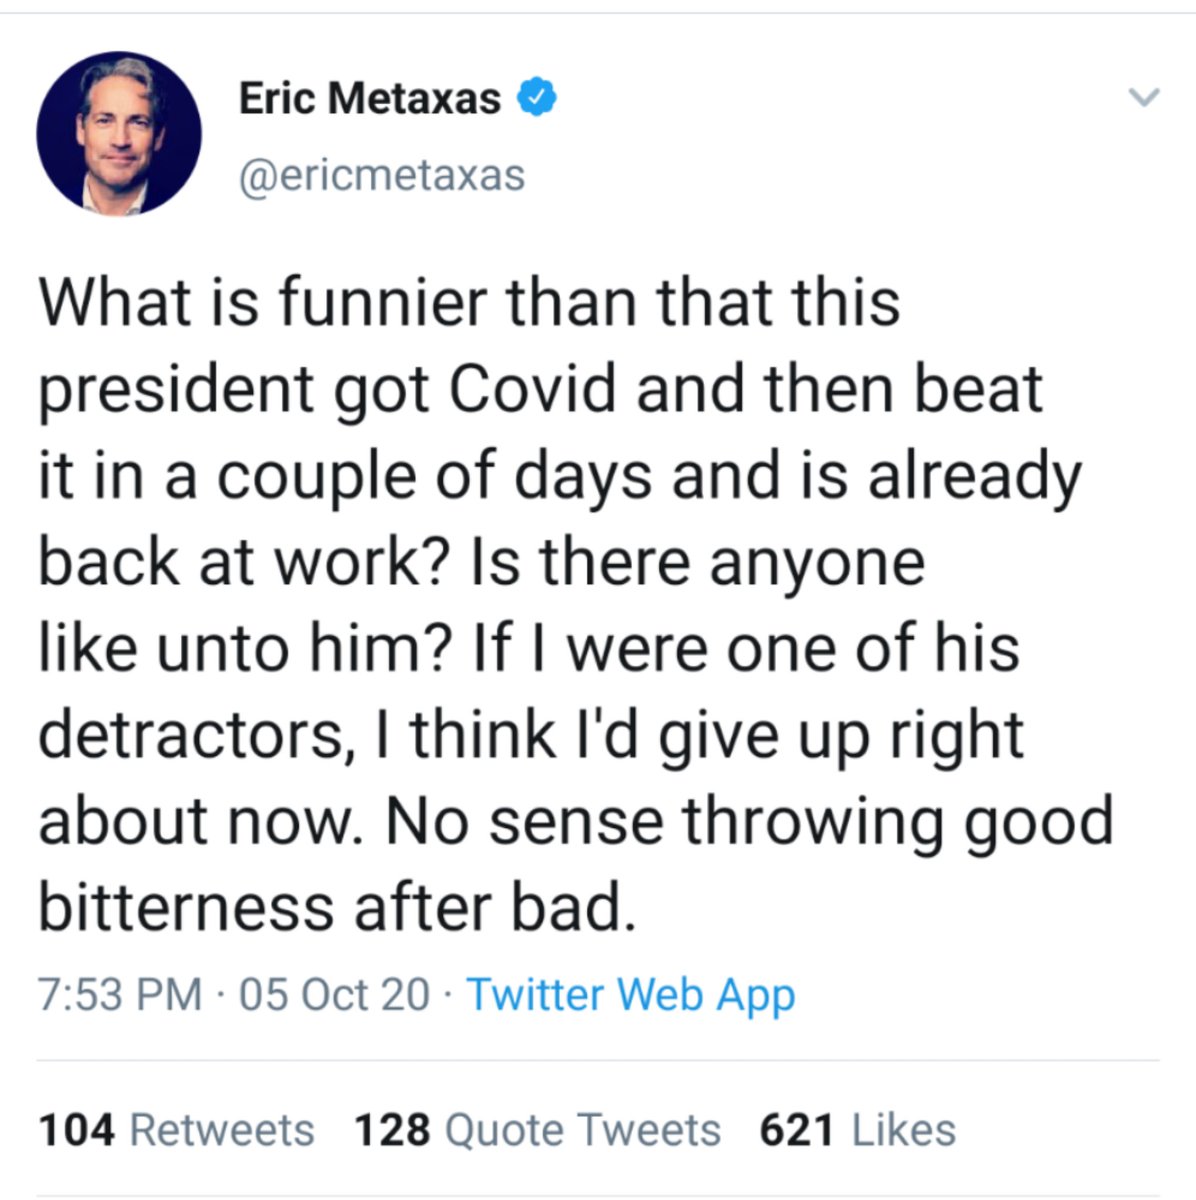 And then yesterday, we have Eric Metaxas coming along using the same, "Is there anyone like unto him?" language that Christians will recognize echos, "Who is like unto the Beast?" from Revelation 13:4